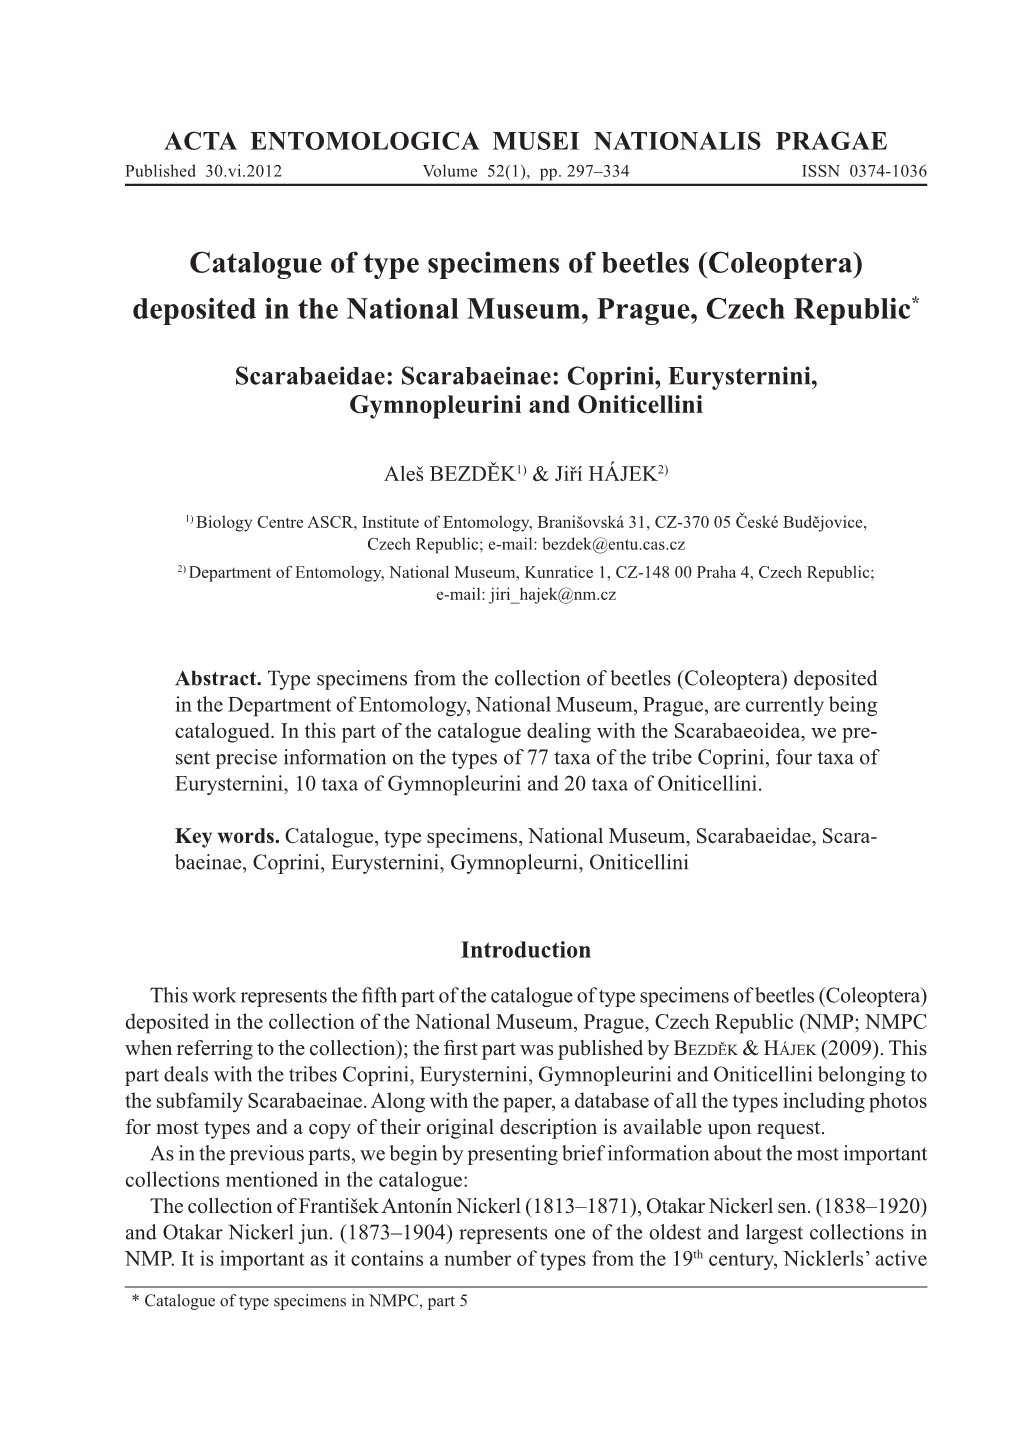 Catalogue of Type Specimens of Beetles (Coleoptera) Deposited in the National Museum, Prague, Czech Republic*